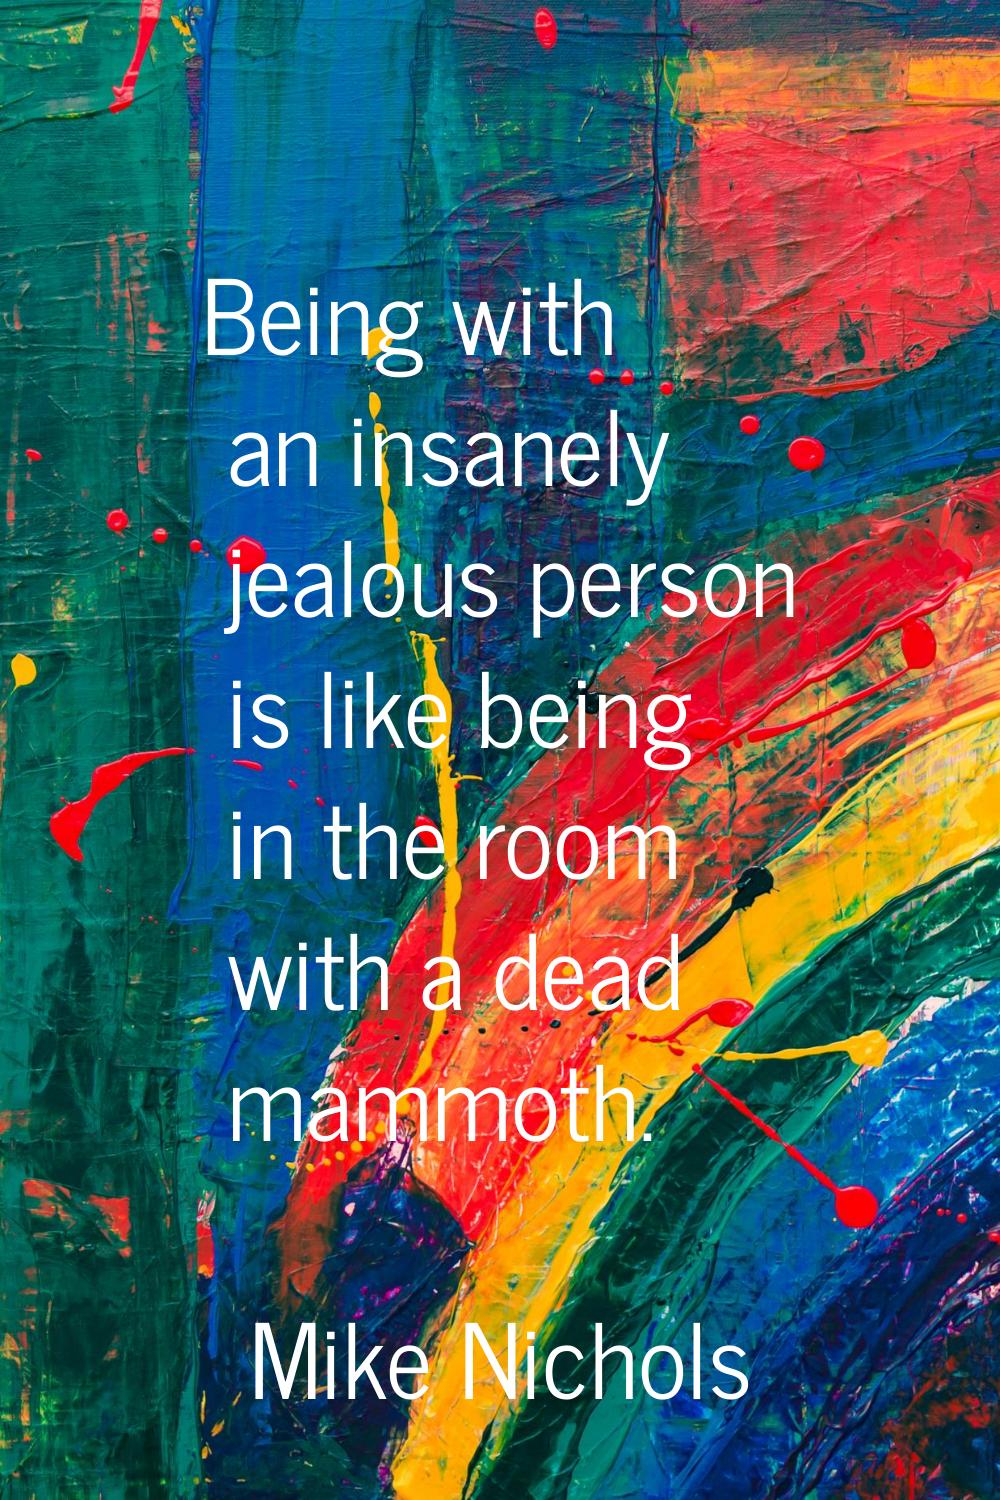 Being with an insanely jealous person is like being in the room with a dead mammoth.